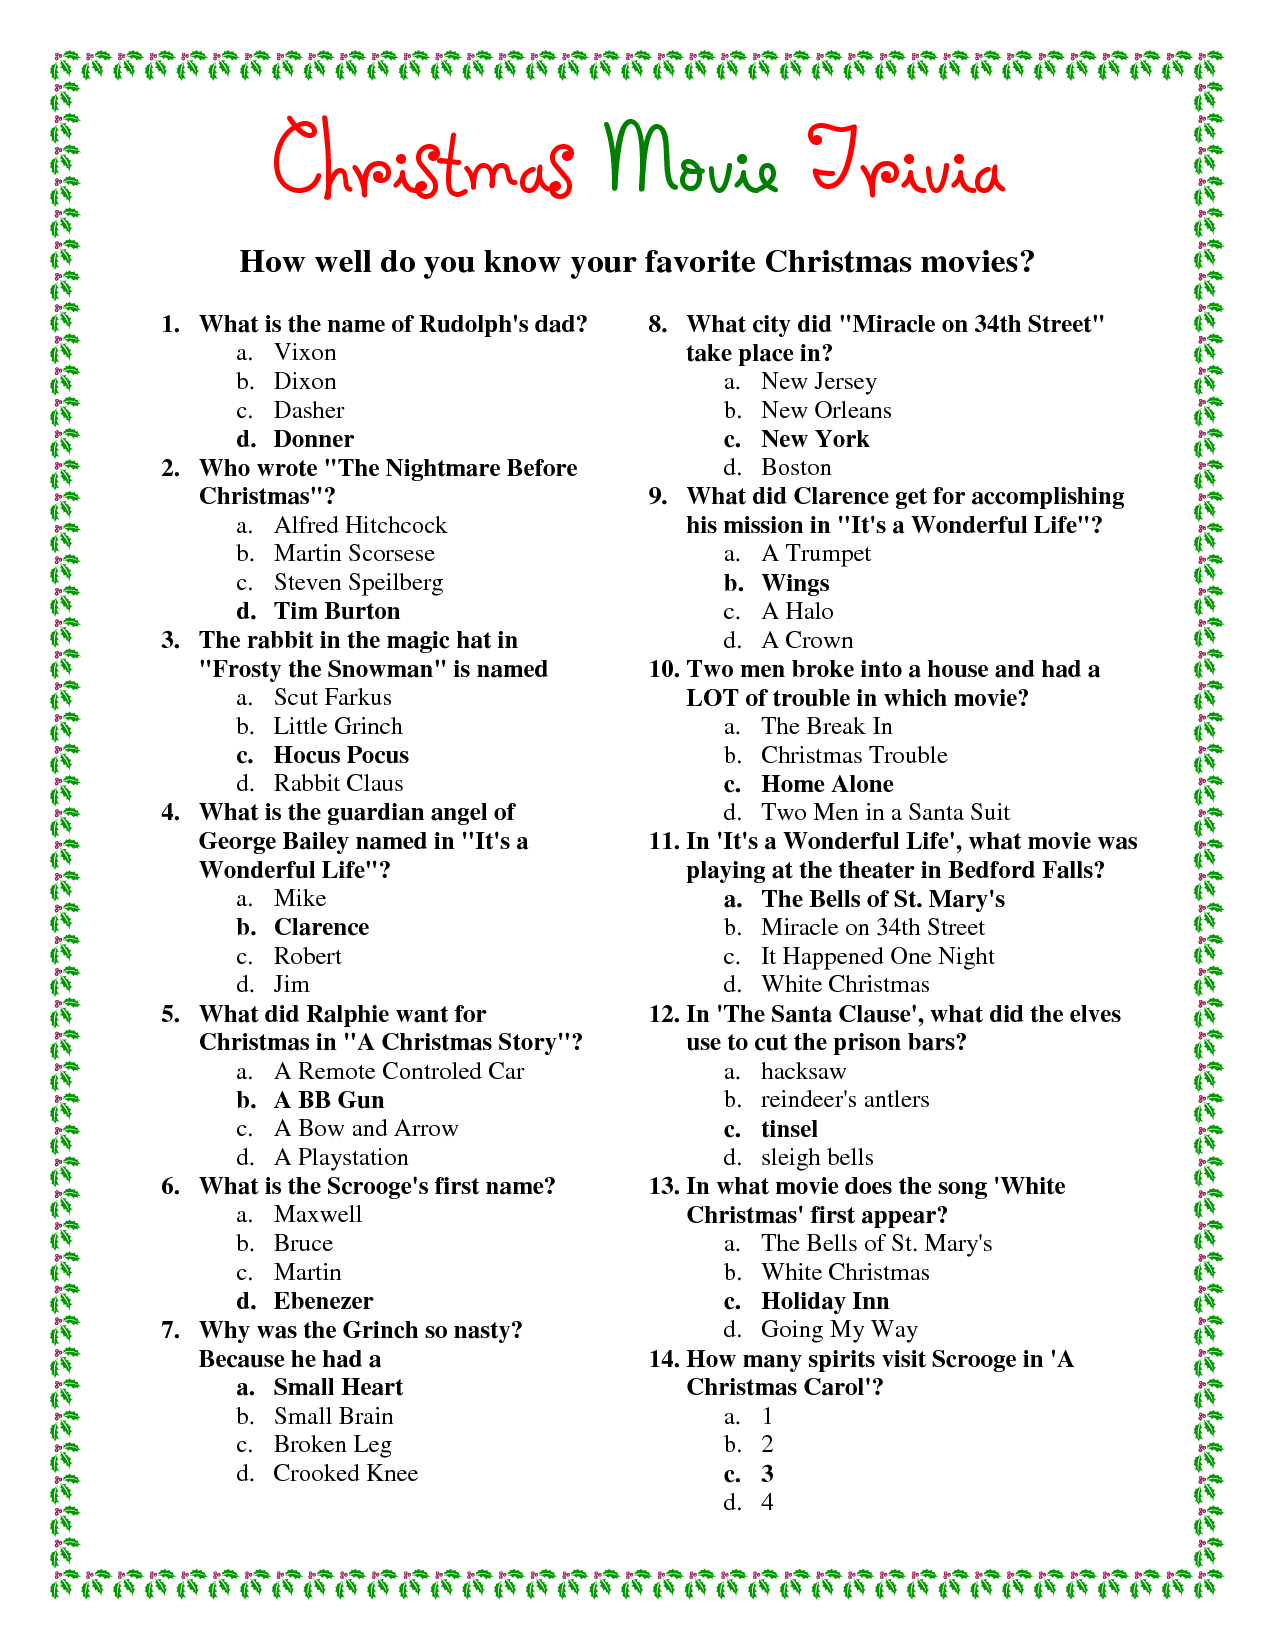 Printable Christmas Trivia Quiz With Questions And Answers - Free Printable Christmas Trivia Quiz